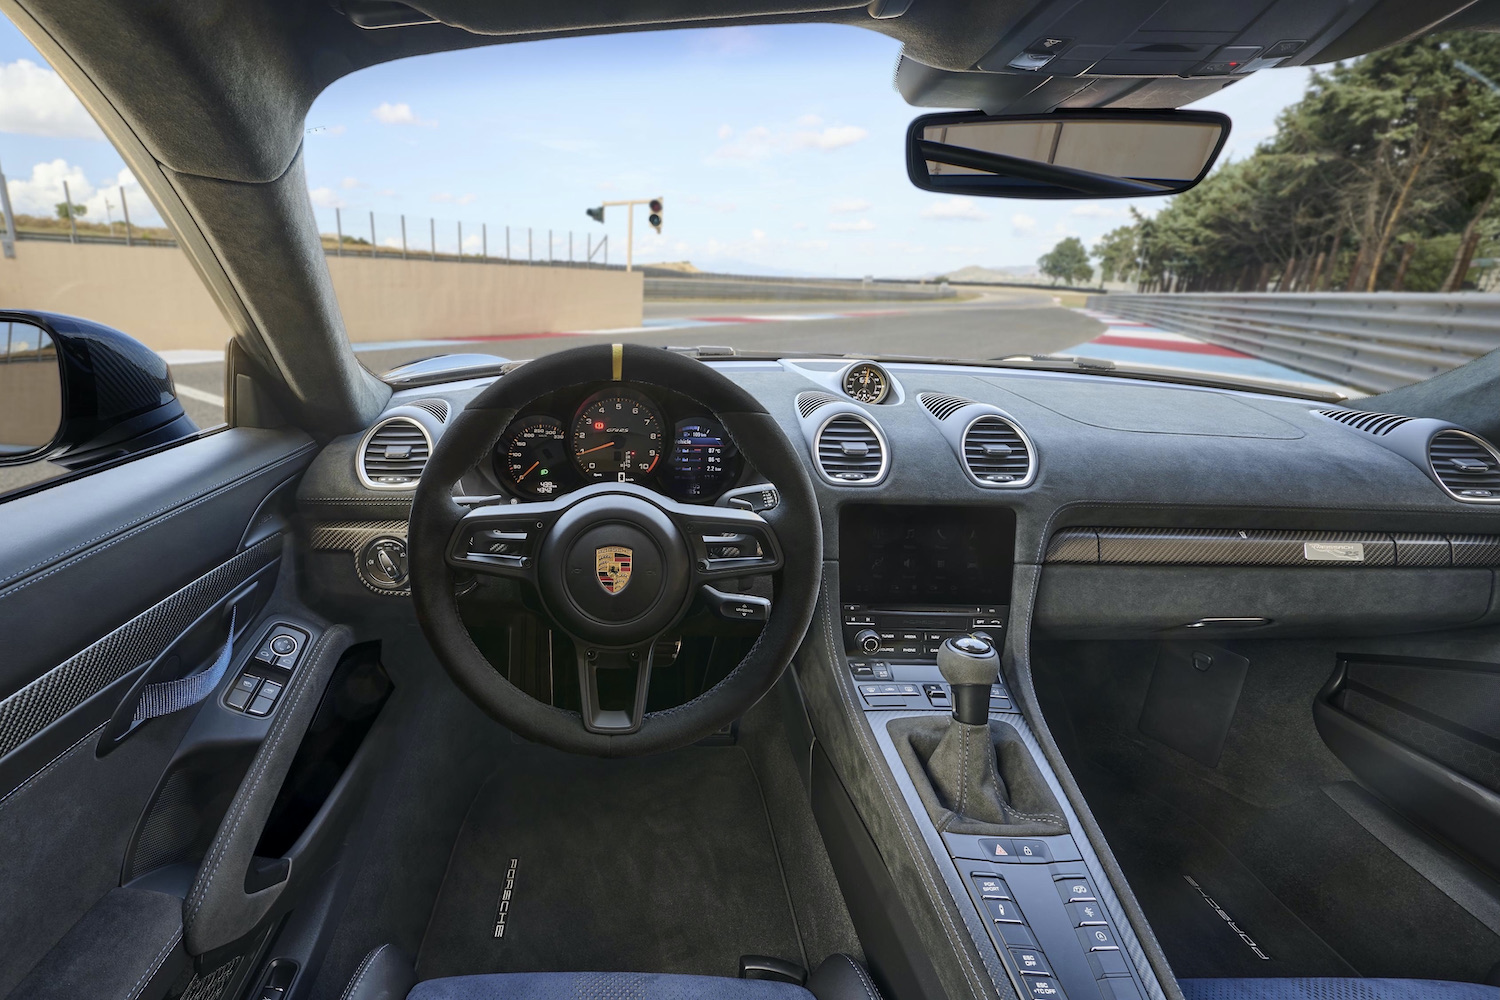 Porsche 718 Cayman GT4 RS interior close up on dashboard and steering wheel on track.